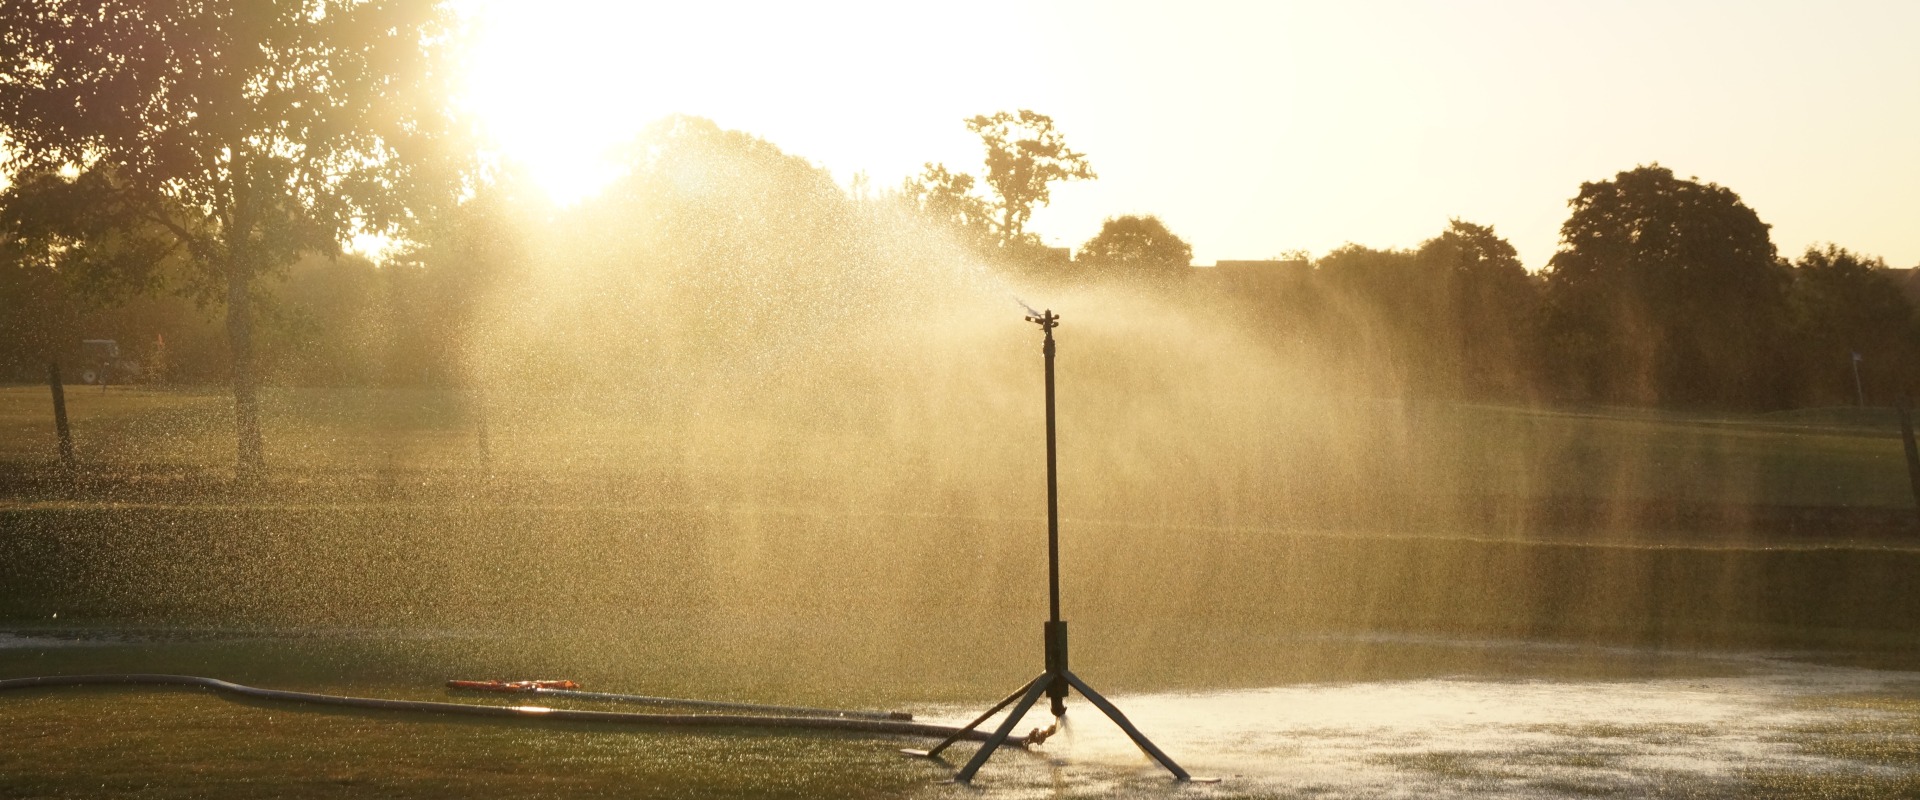 Winterize And Beautify: Combining Winterize Sprinkler System Service With Landscaping Services In Northern VA